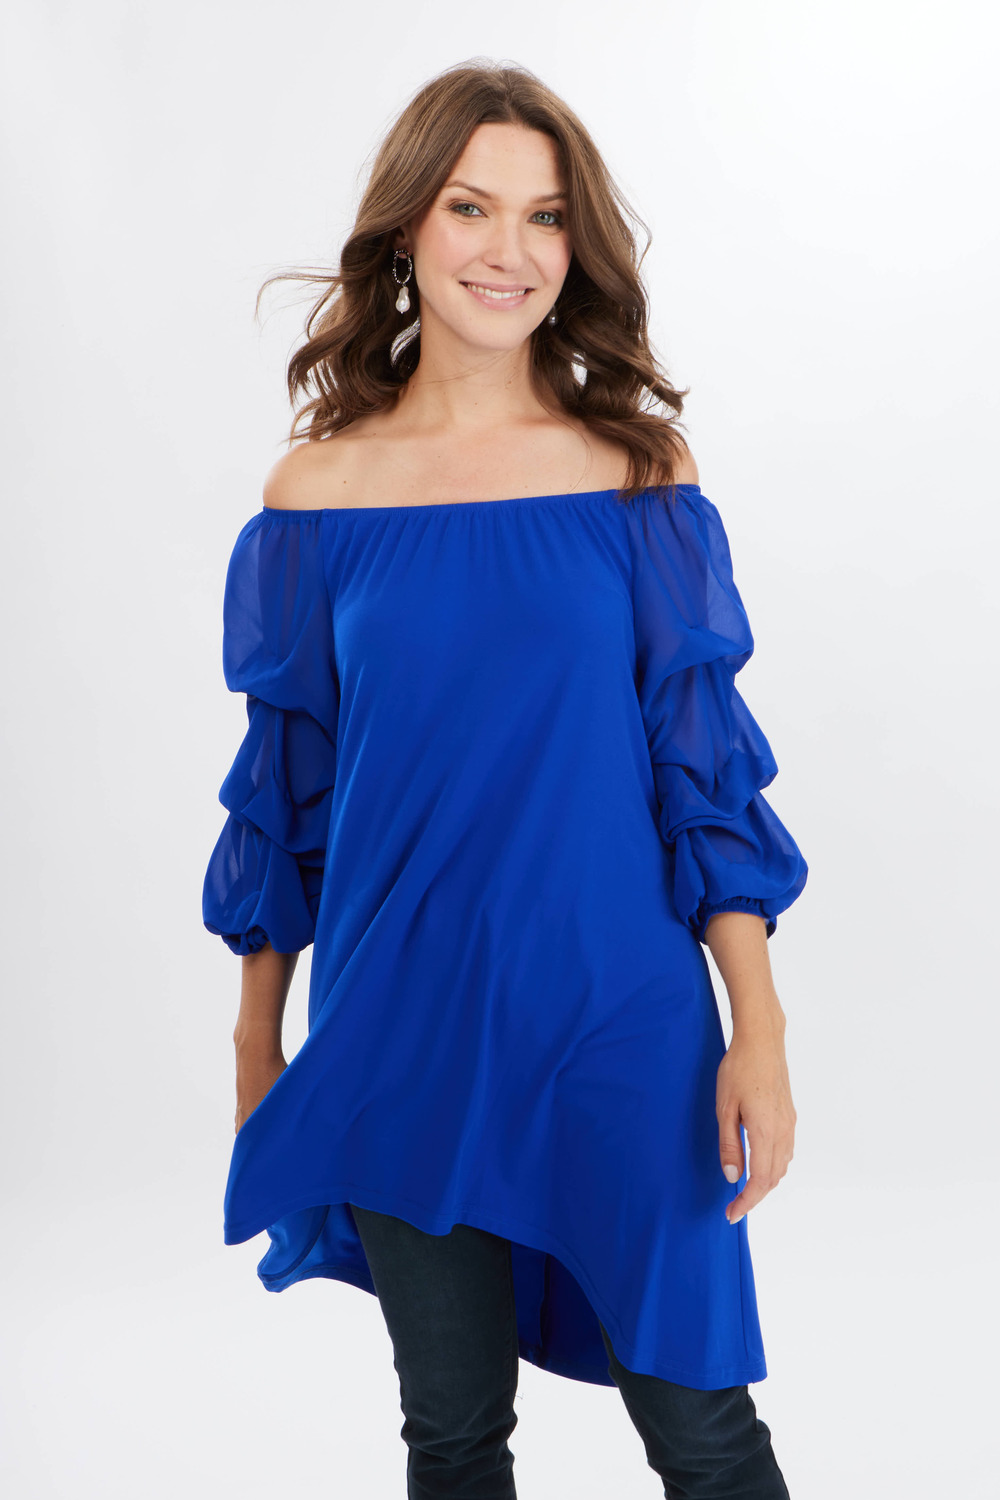 Cold Shoulder Tunic Style 232136. Royal Sapphire 163